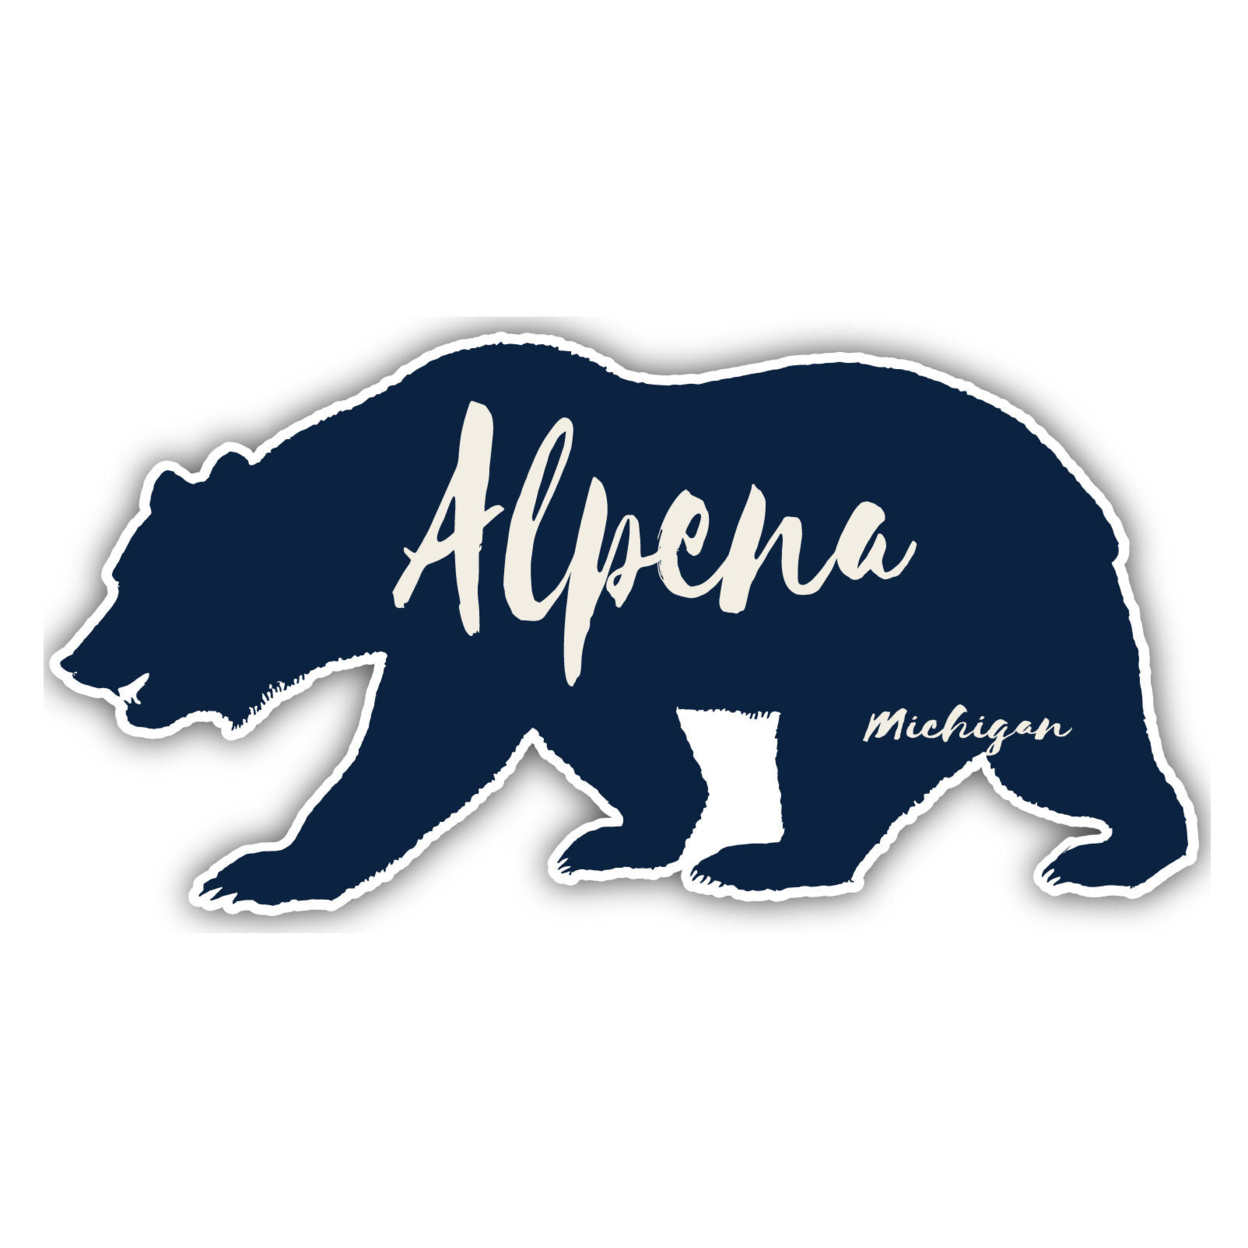 Alpena Michigan Souvenir Decorative Stickers (Choose Theme And Size) - 4-Pack, 2-Inch, Great Outdoors